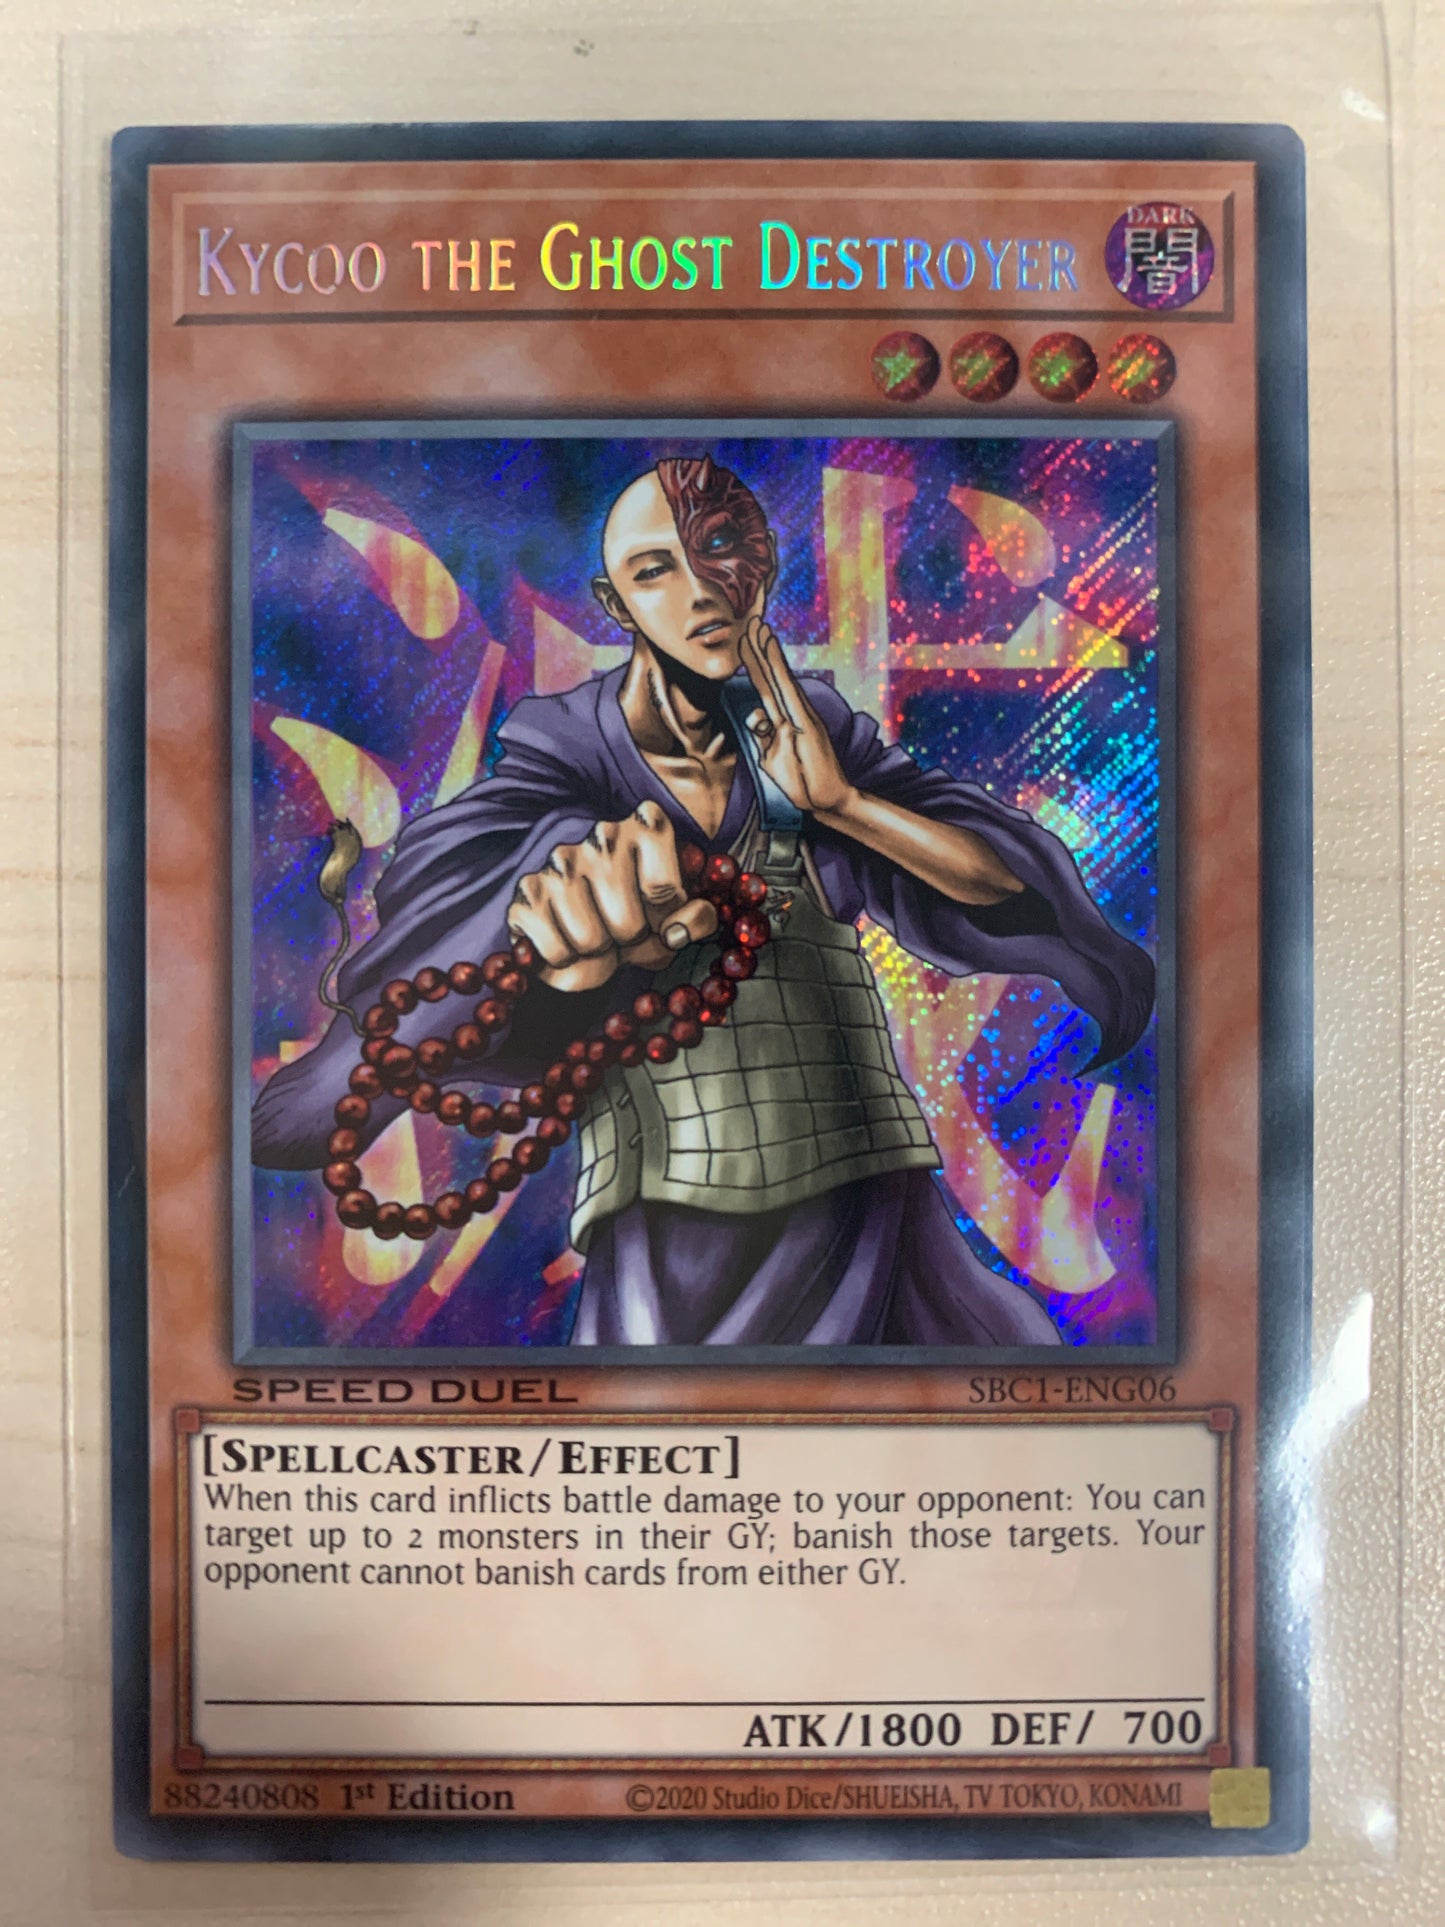 Kycoo The Ghost Destroyer (Secret)